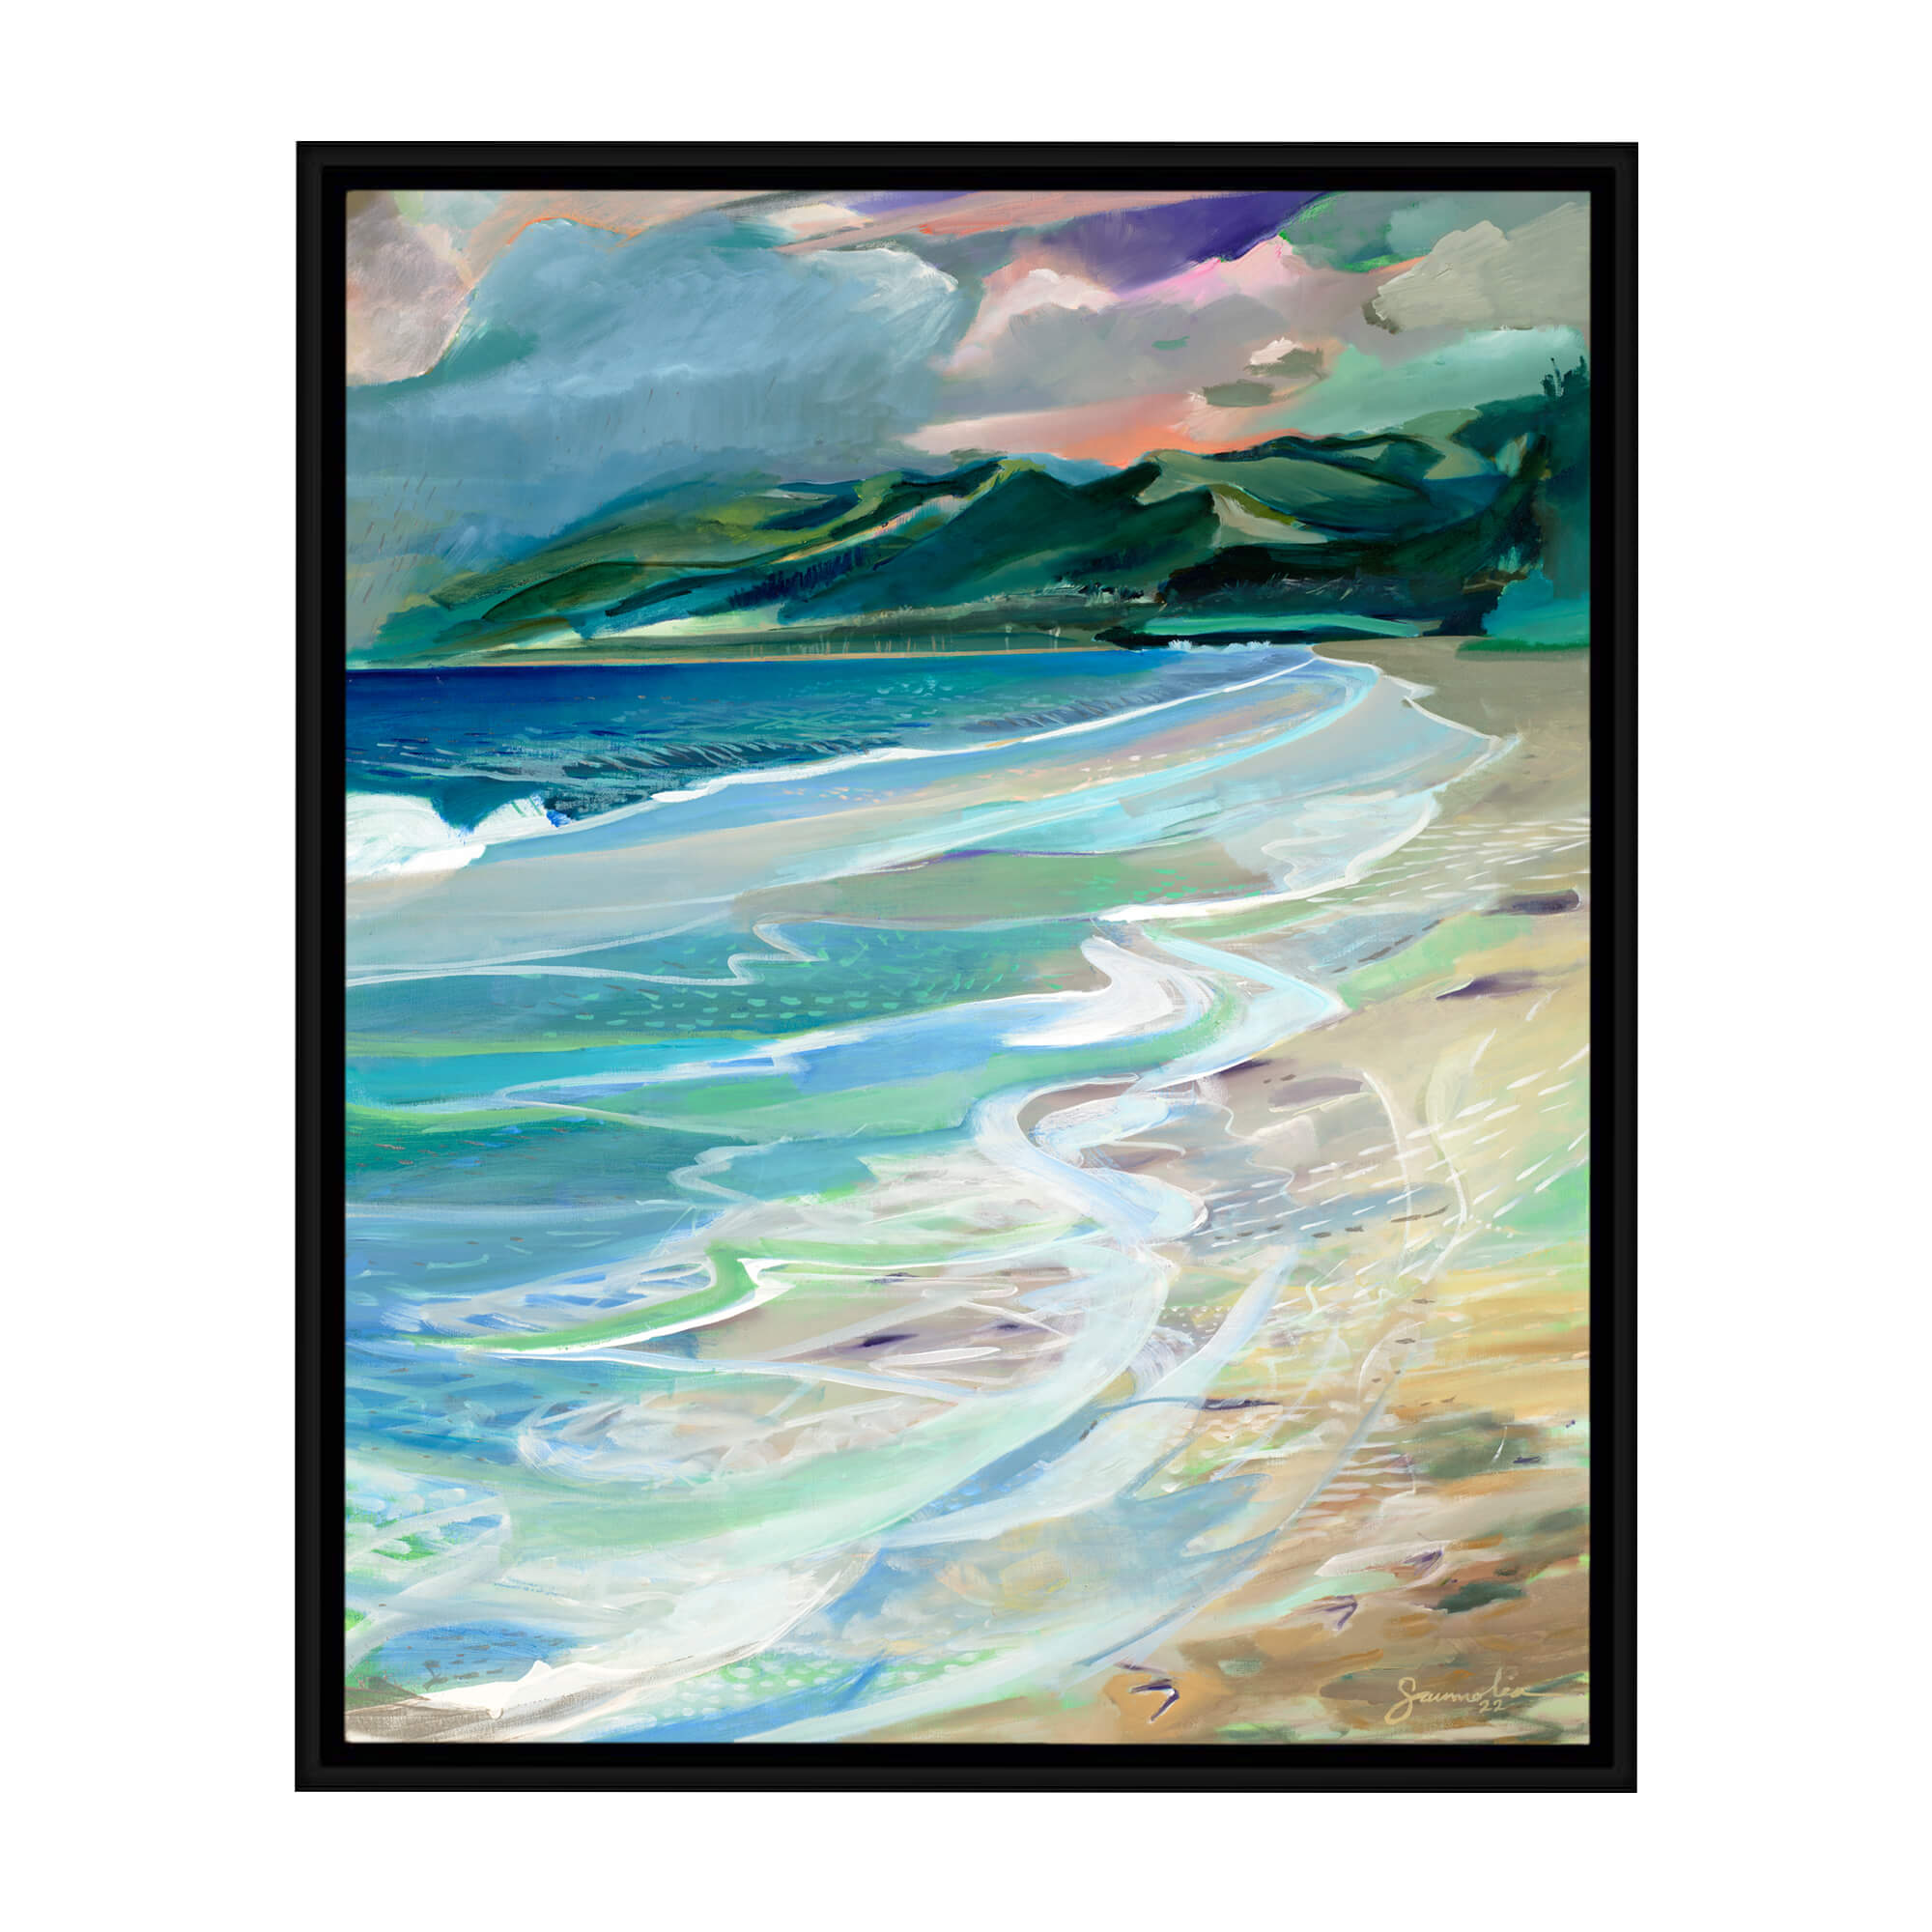 A framed canvas giclée art print featuring a beautiful abstract landscape with crashing waves and distant mountains by popular Hawaii artist Saumolia Puapuaga